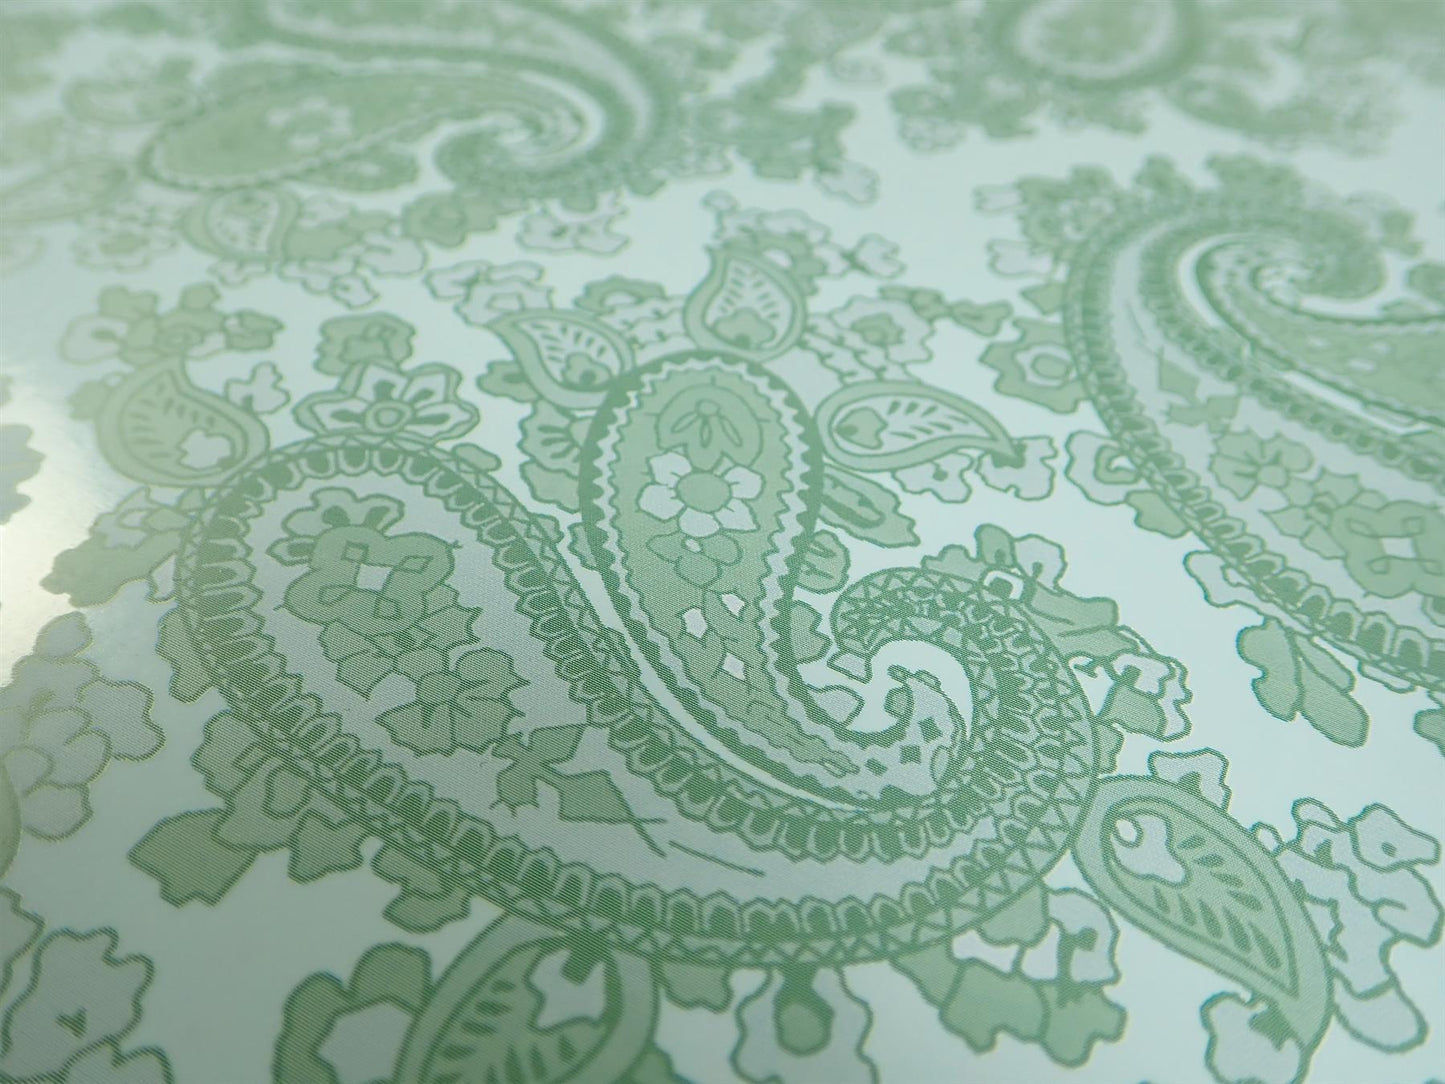 Luthitec Clear Backed Surf Green Paisley Paper Decal Sheet - 420x295mm (16.5x11.61")